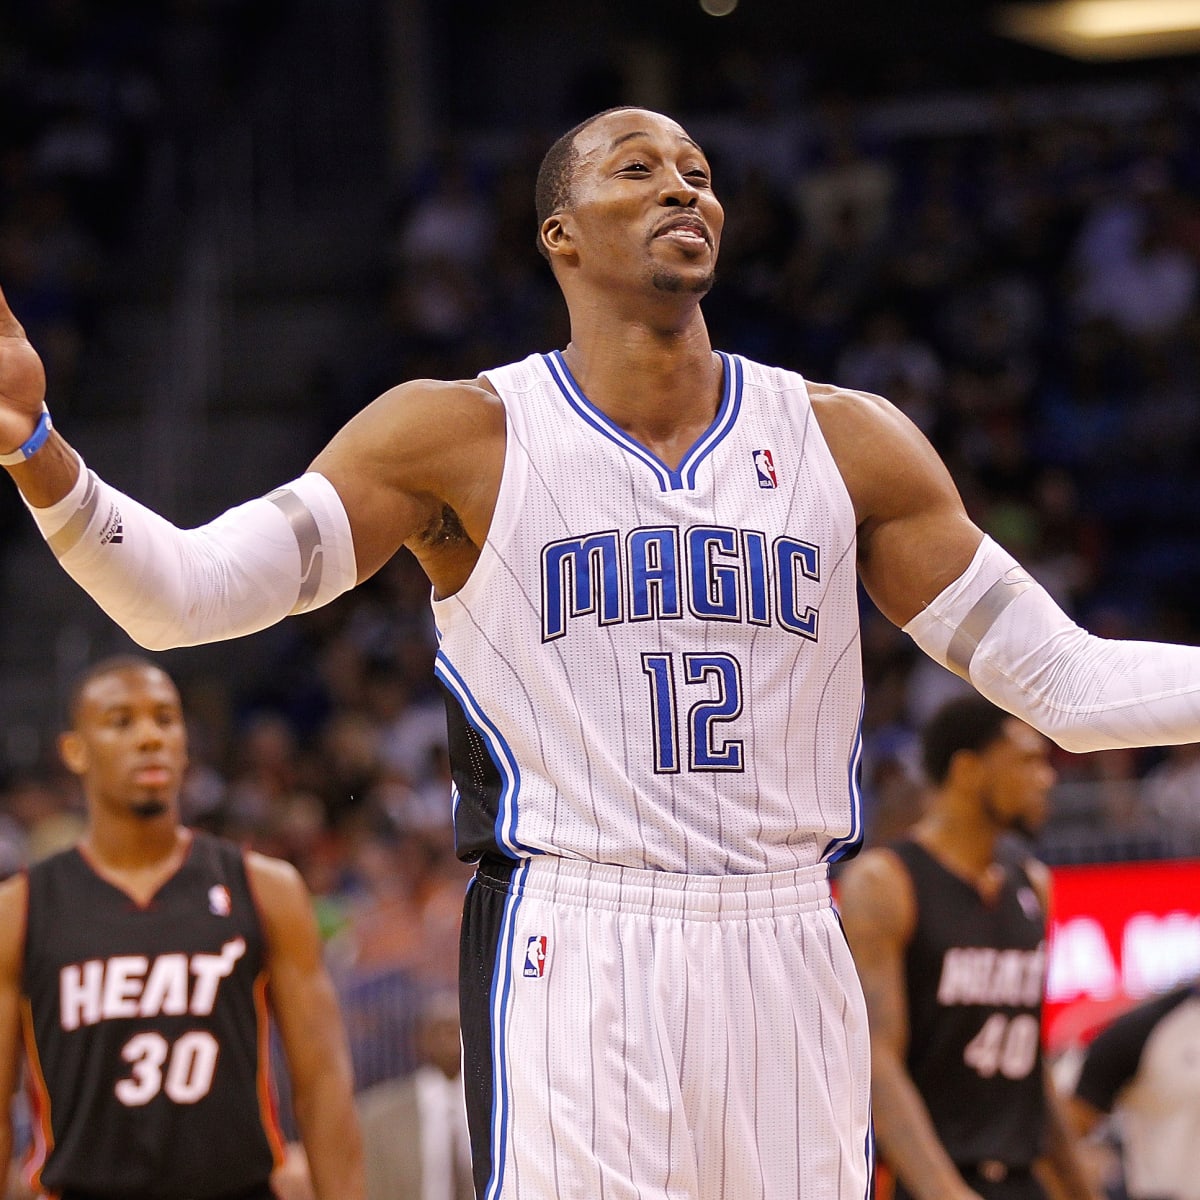 Report: Warriors Make Decision on Dwight Howard After Two-Day Visit, Sports-illustrated